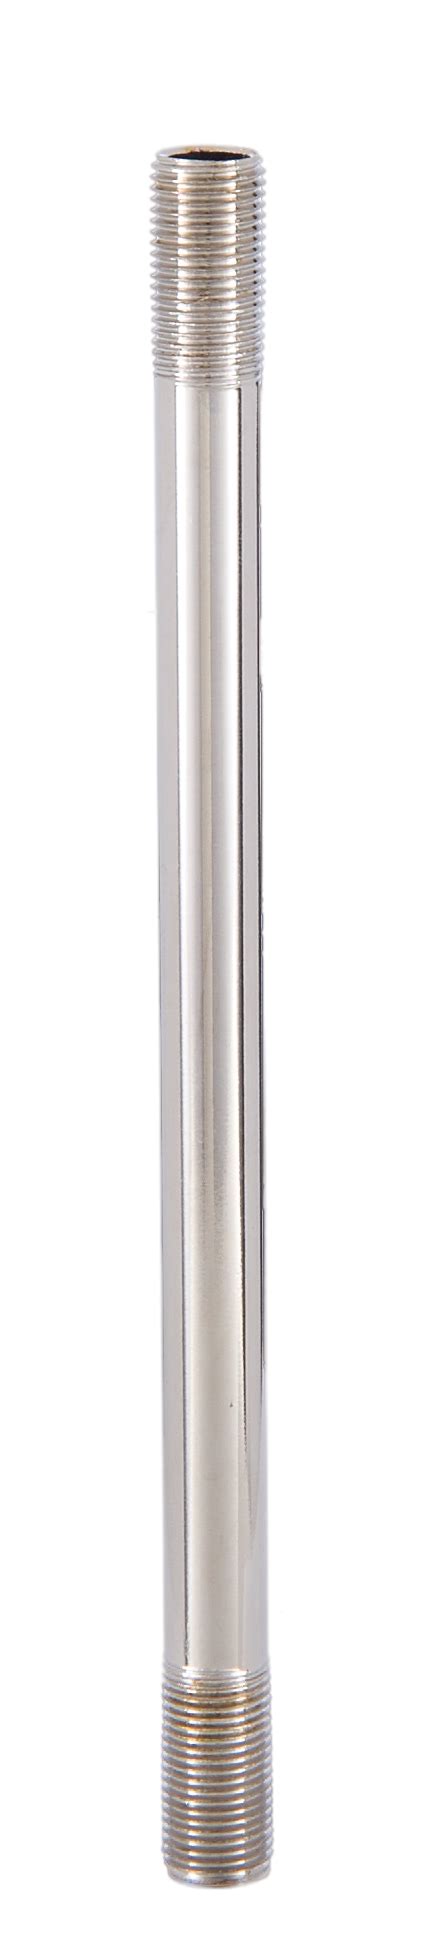 All products from threaded lamp rod category are shipped worldwide with no additional fees. Nickel Plated 1/8 IP Steel Threaded Rod 22300N | B&P Lamp ...